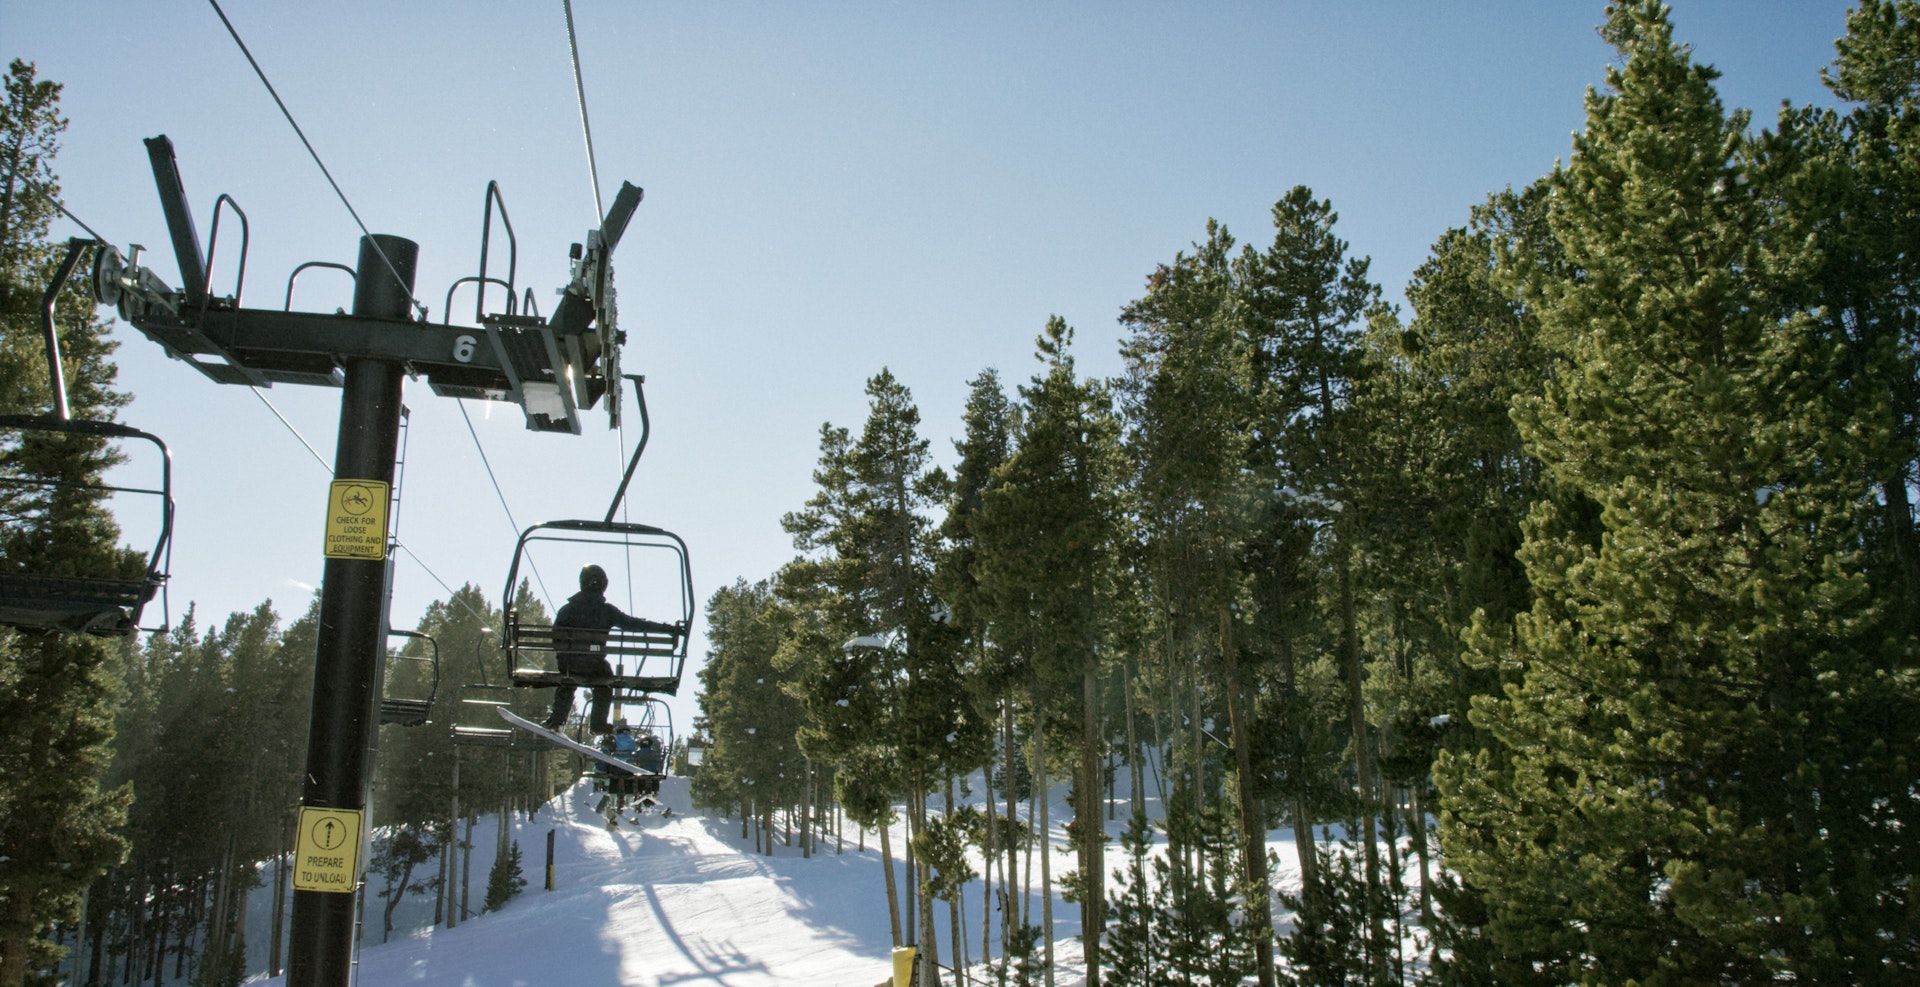 Snowboarders ride a ski lift at on a bright, clear, sunny day